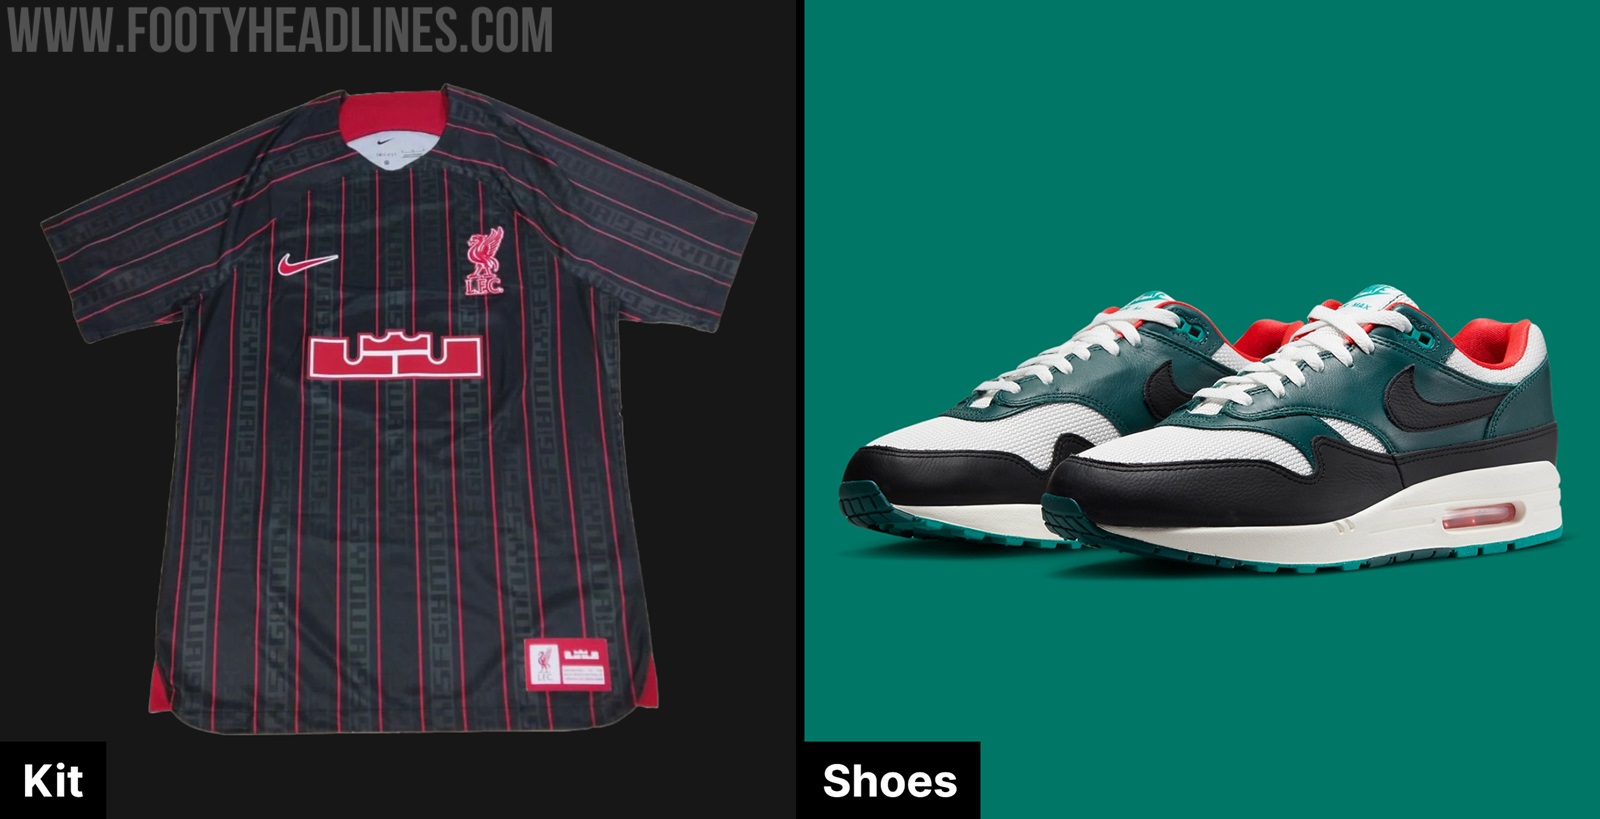 Take a first look at the Liverpool FC x LeBron collection